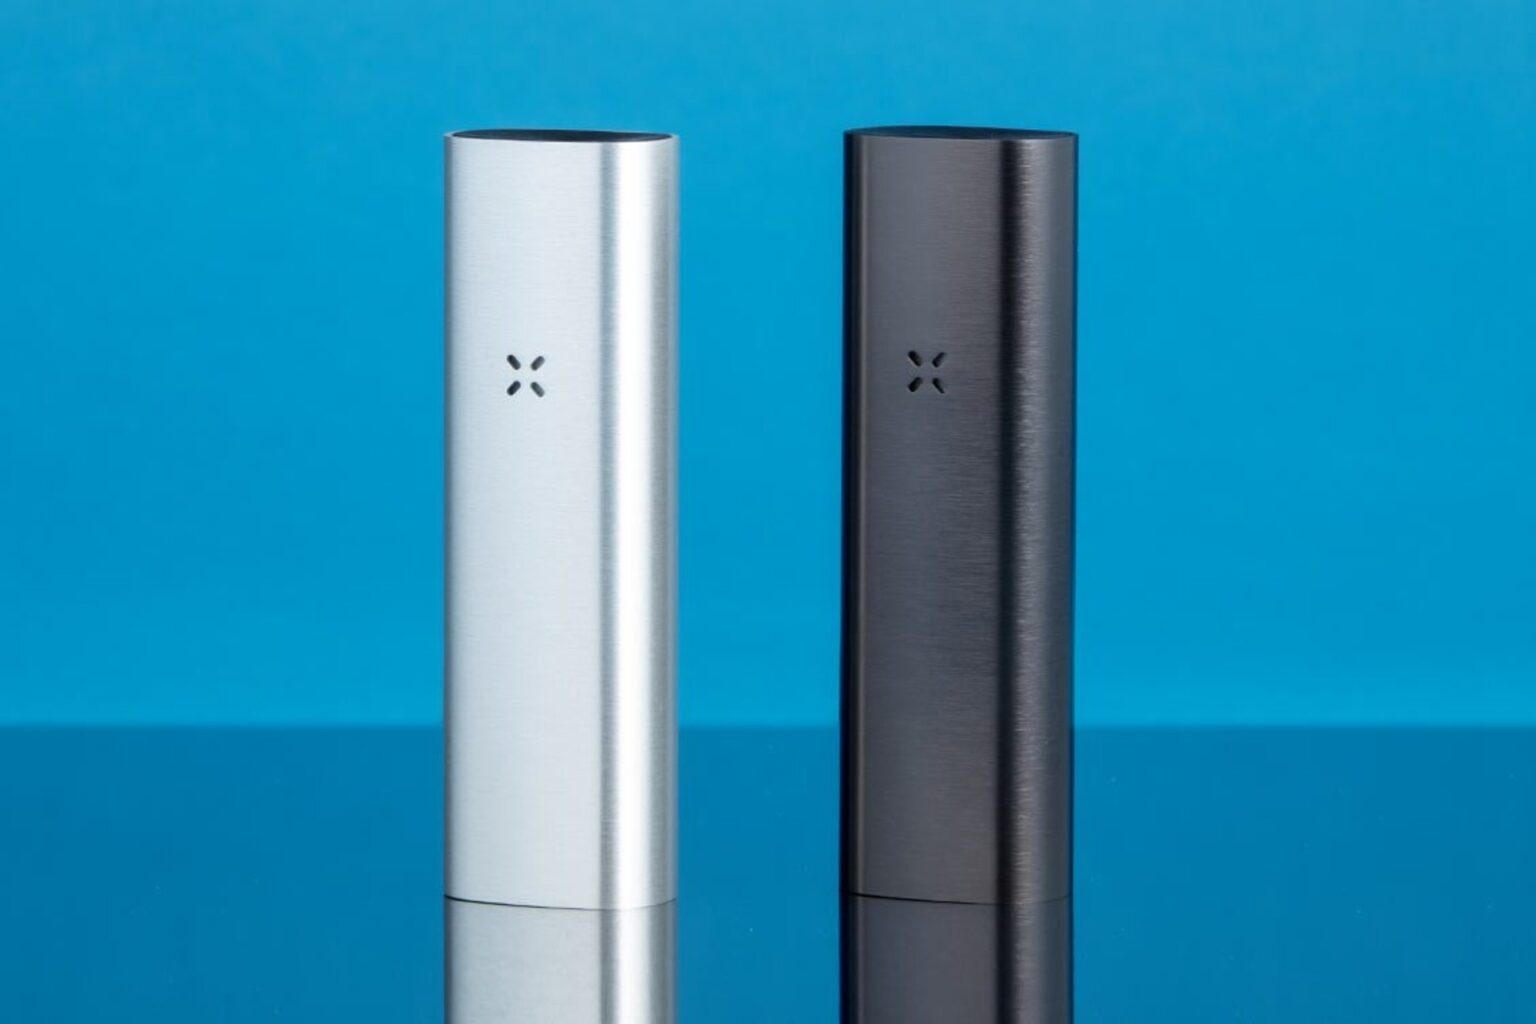 Pax 2 is one of the best vape pens on the market. We discuss how to pack the Pax 2 for maximum enjoyment.